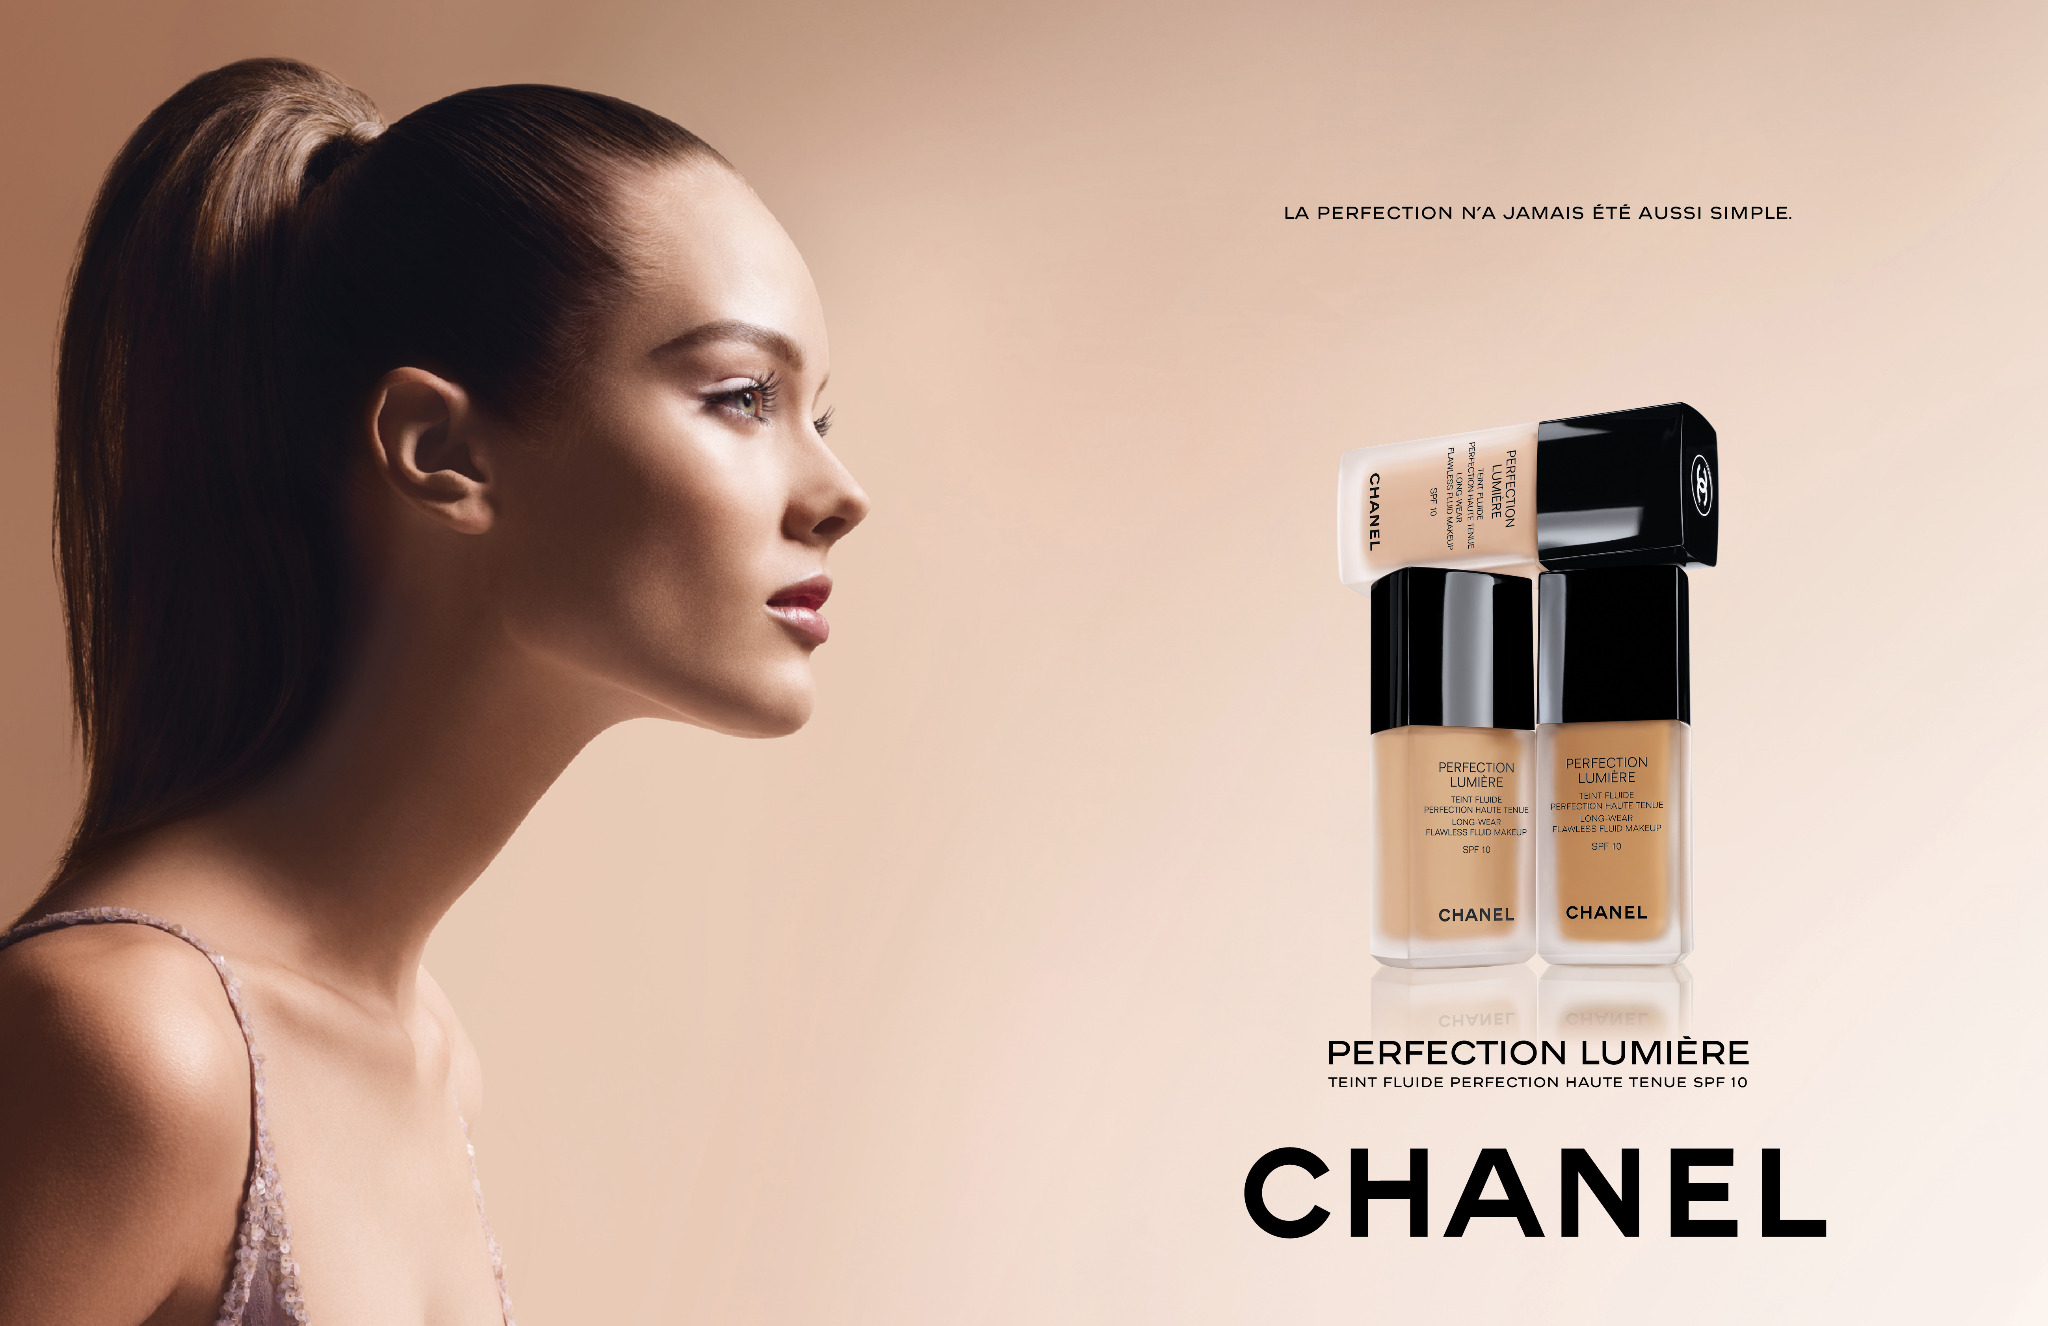 CHANEL on X: Introducing PERFECTION LUMIÈRE, the all-day natural